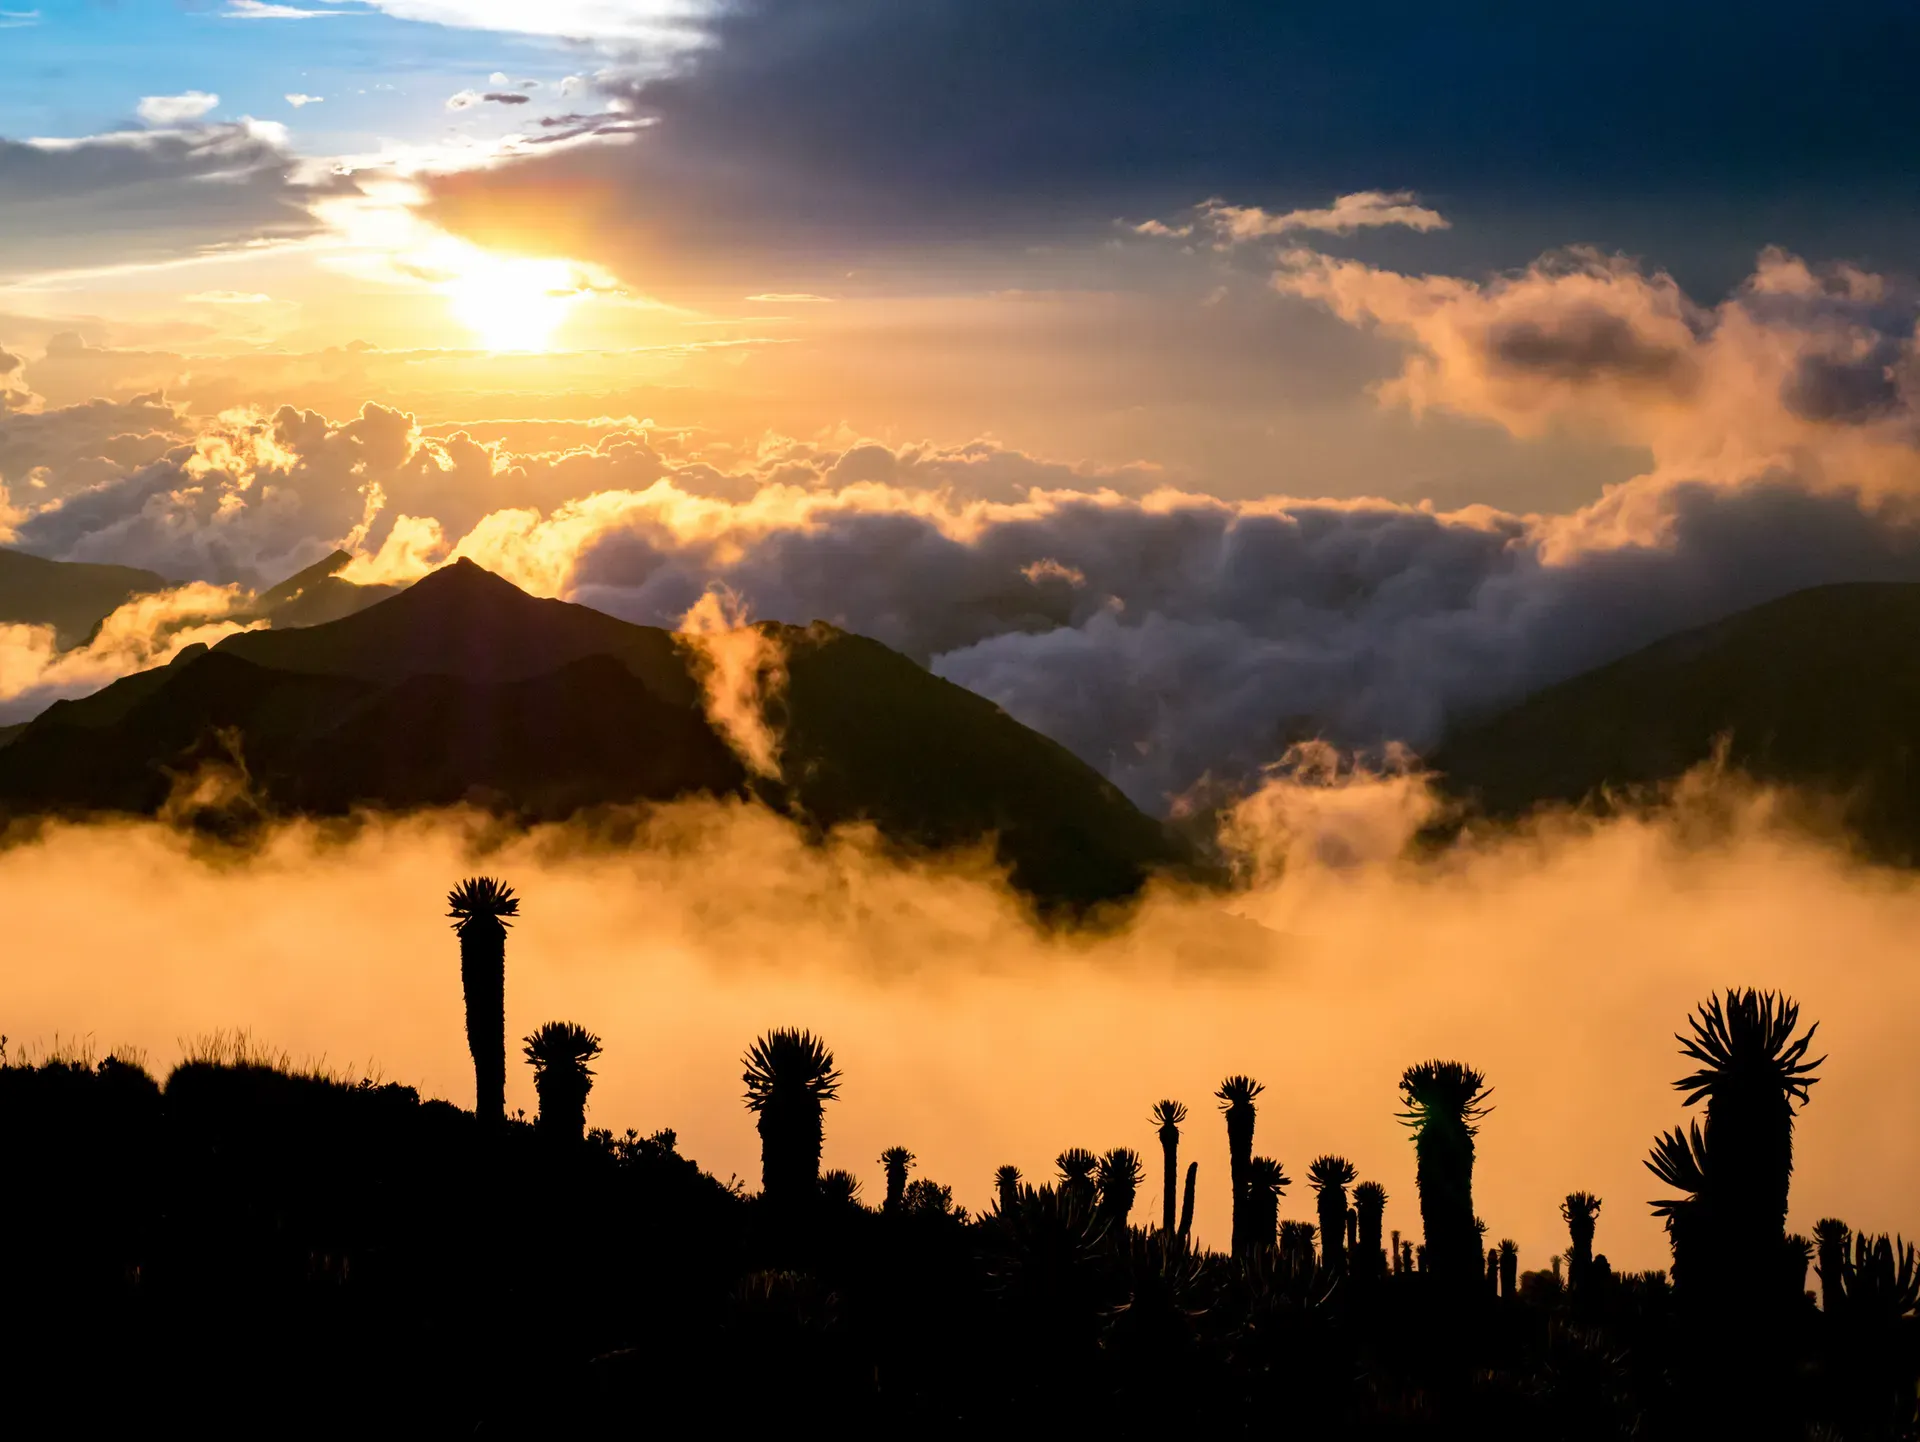 Paramillo del Quindio (4750m) is one of the highest mountains in the Los Nevados National Natural Park. Photo: Getty